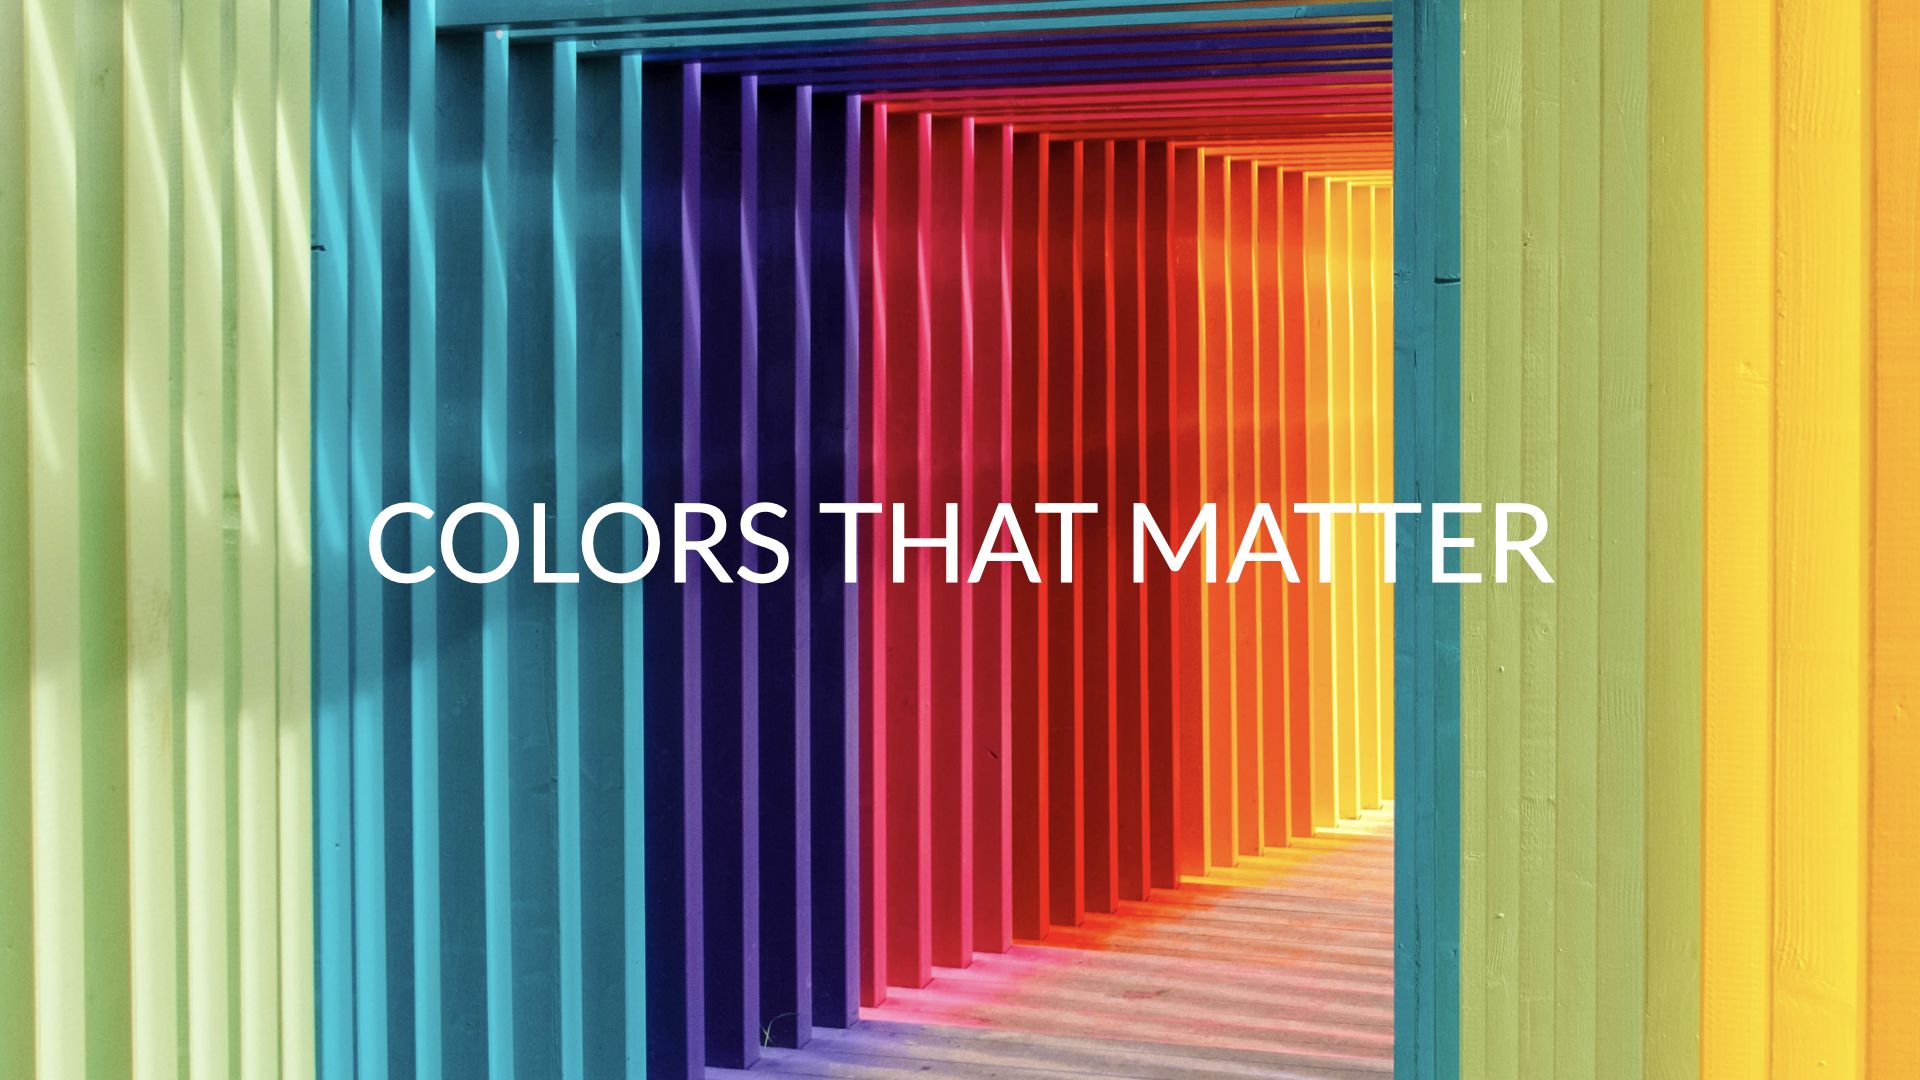 How “Colors that Matter” captured the hearts and minds of B2B and B2C customers